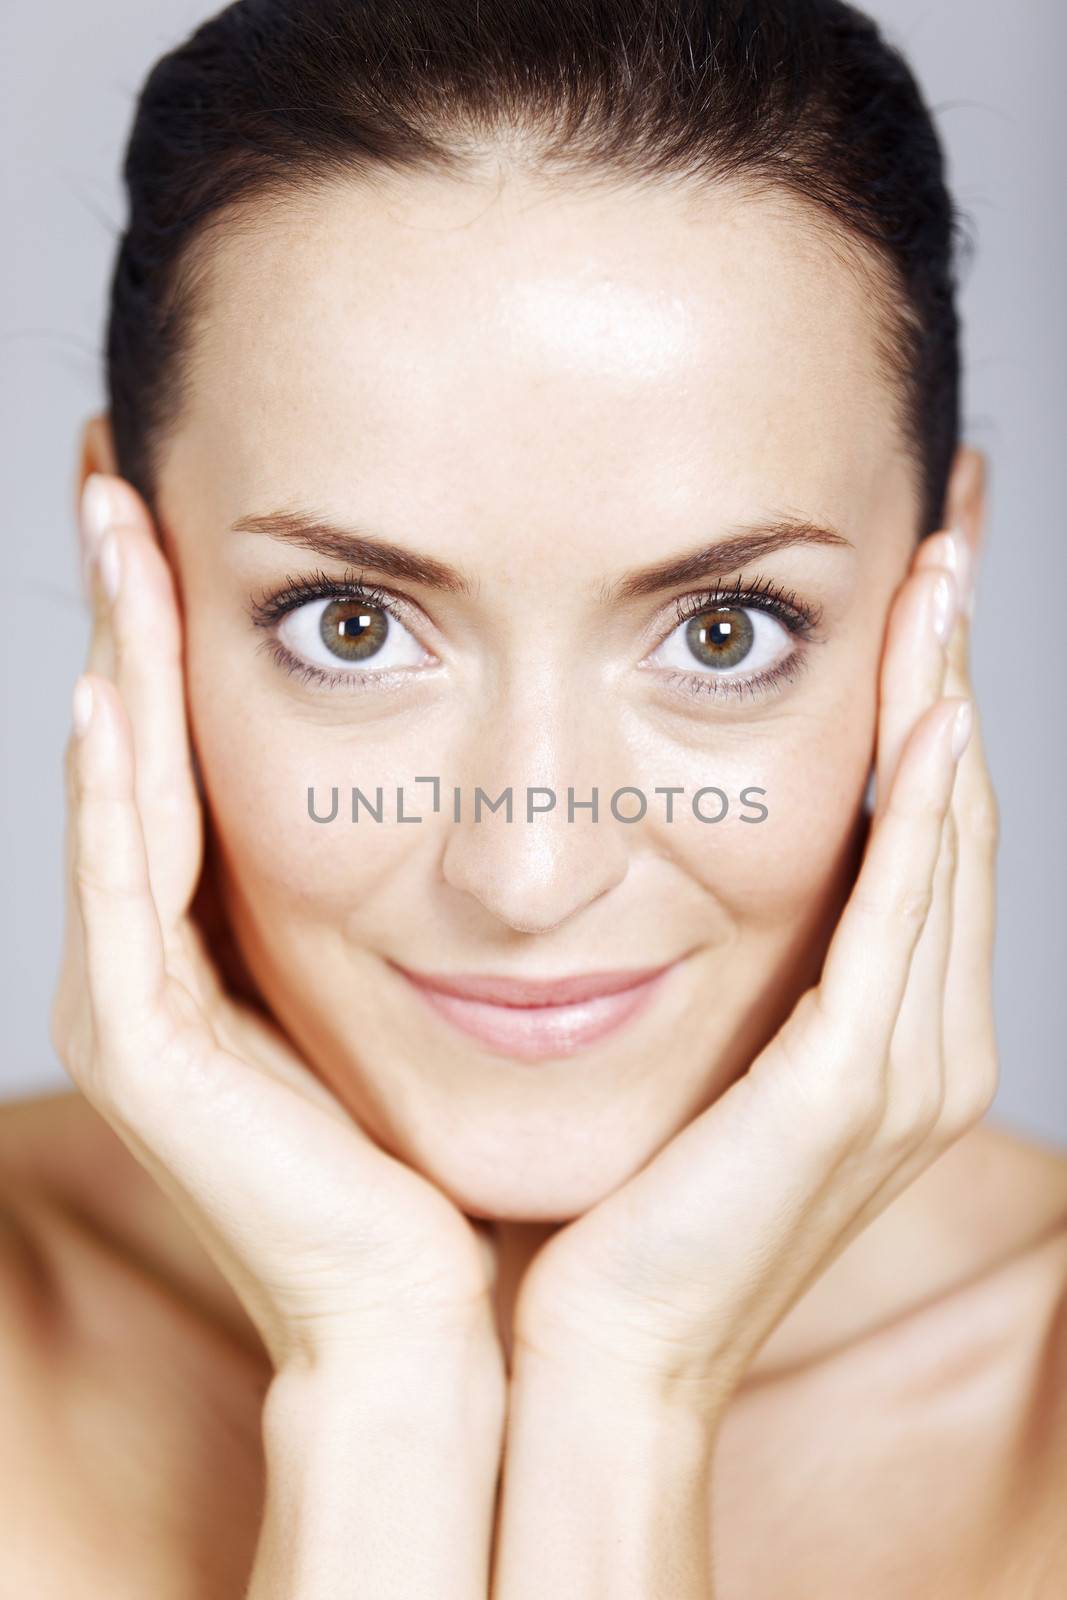 Young woman in a beauty style pose with natural skin.